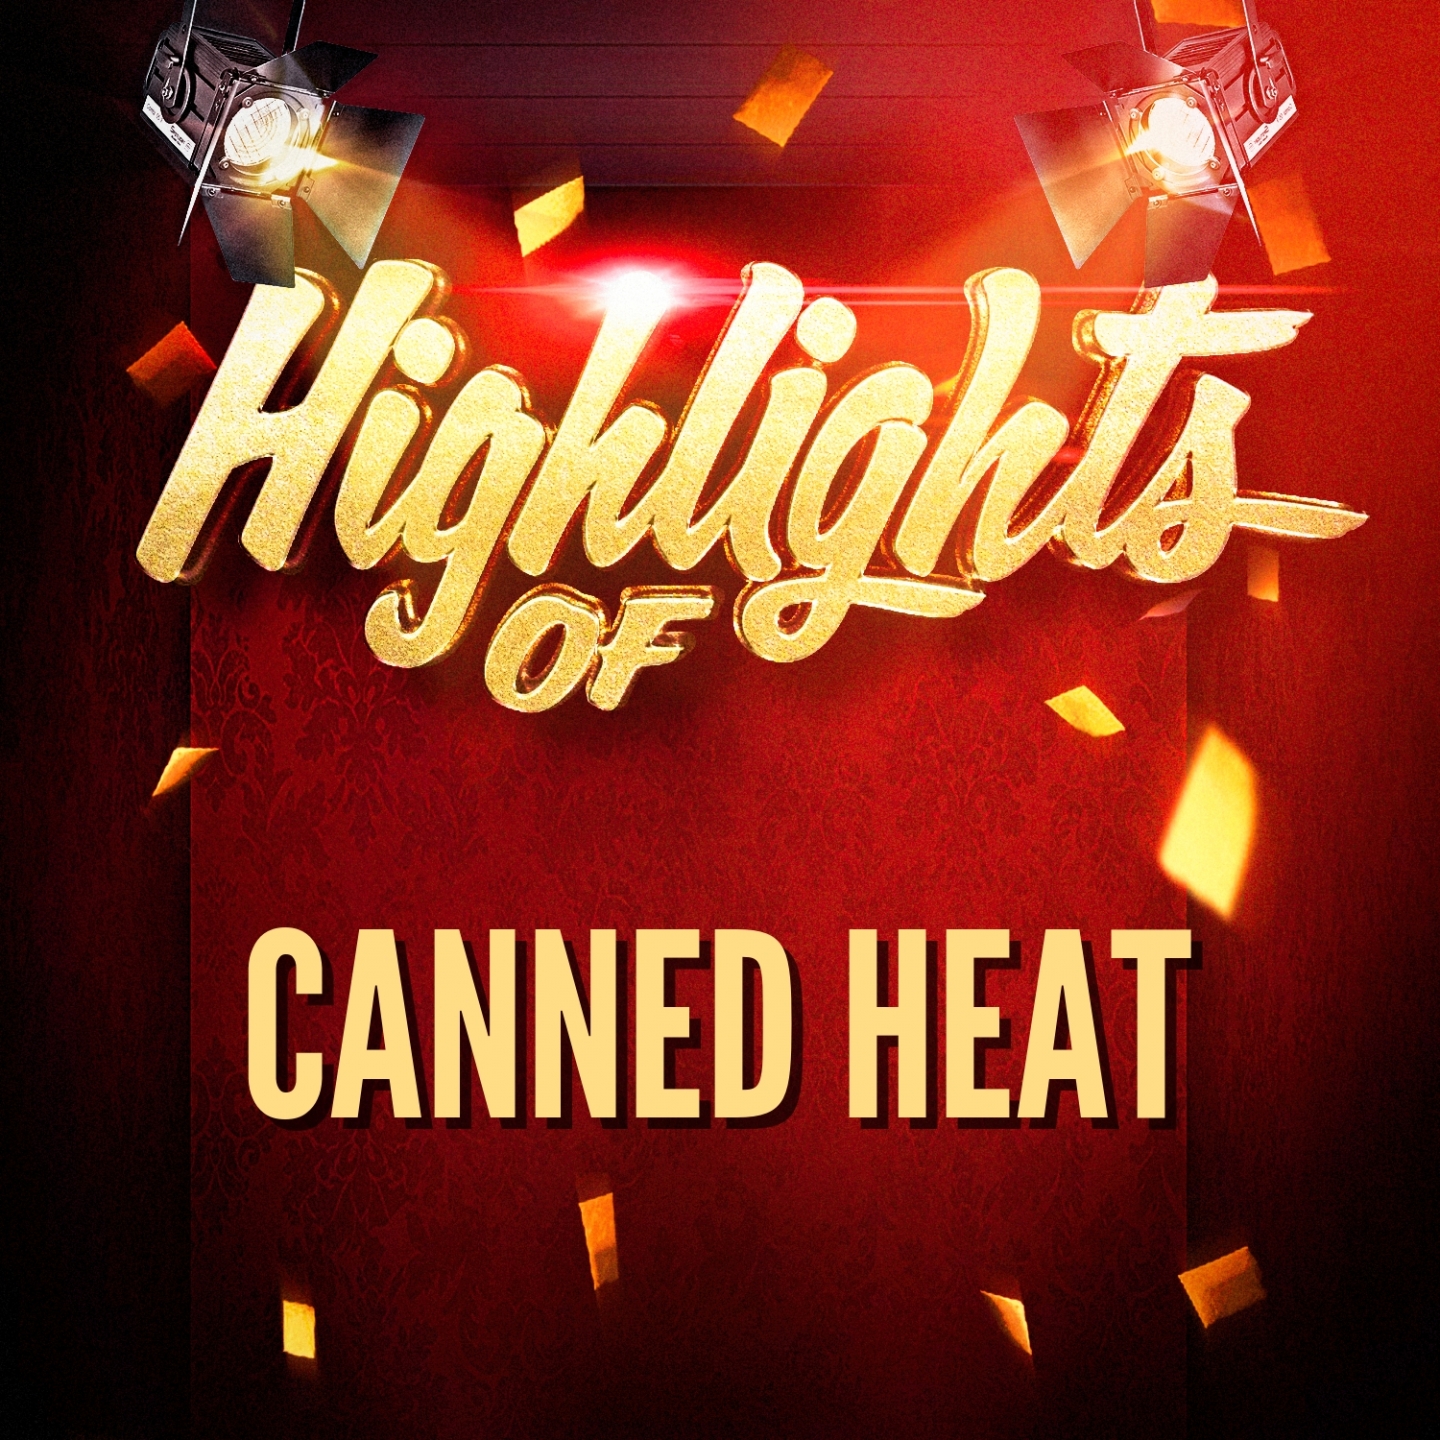 Highlights of Canned Heat